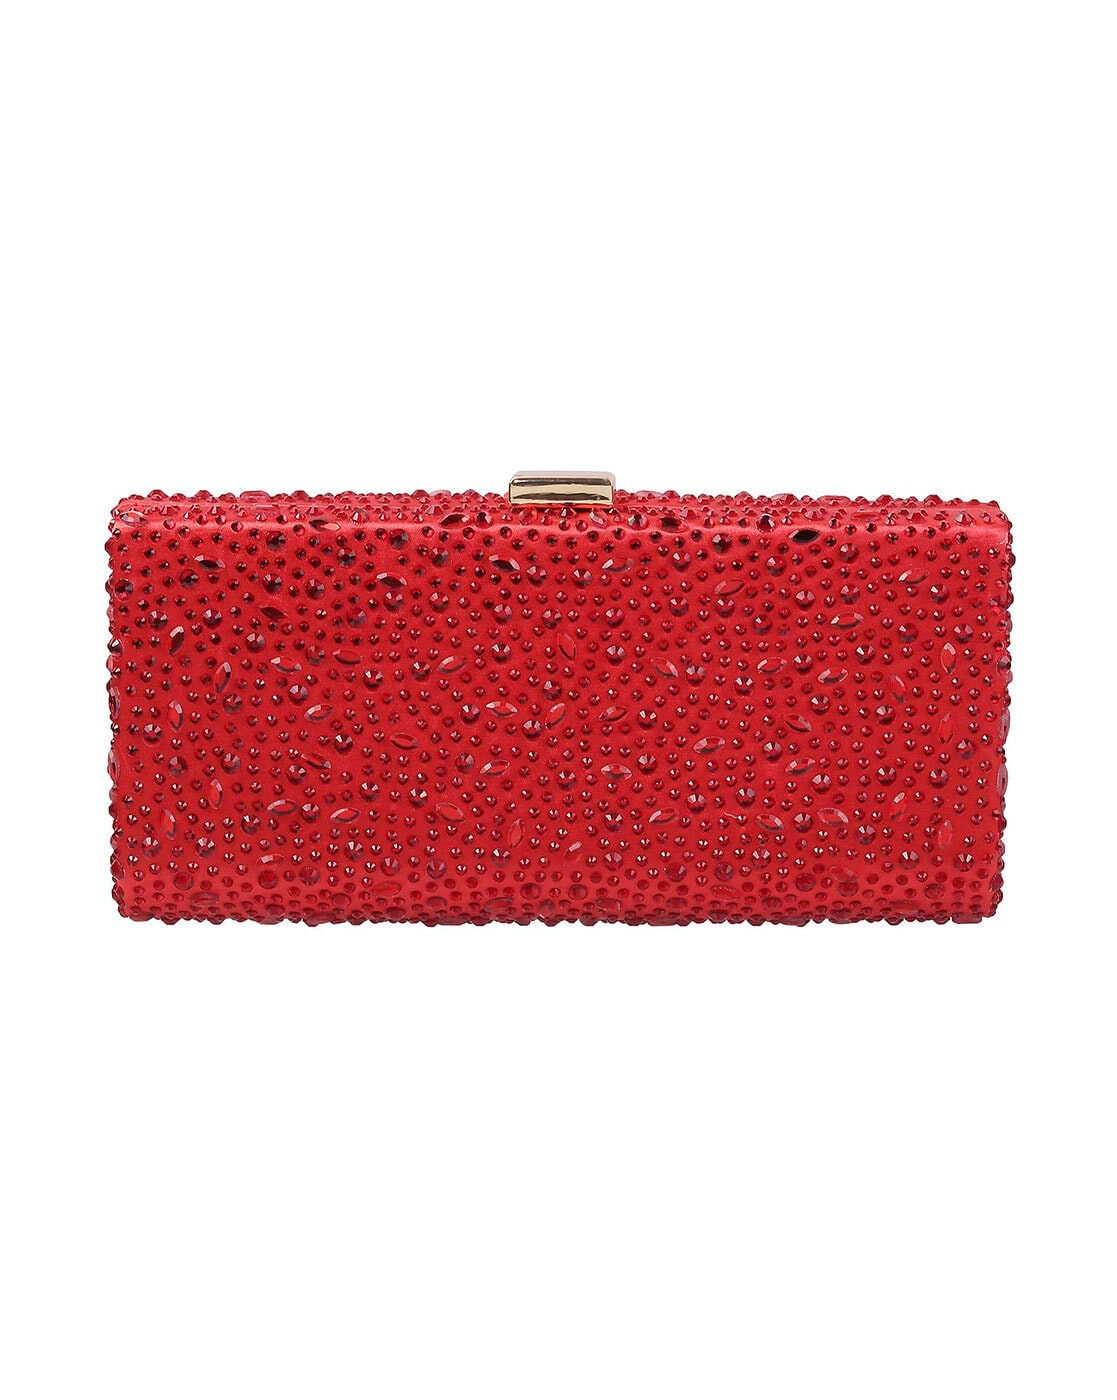 15 Best Red Clutch Purses to Shop in 2023